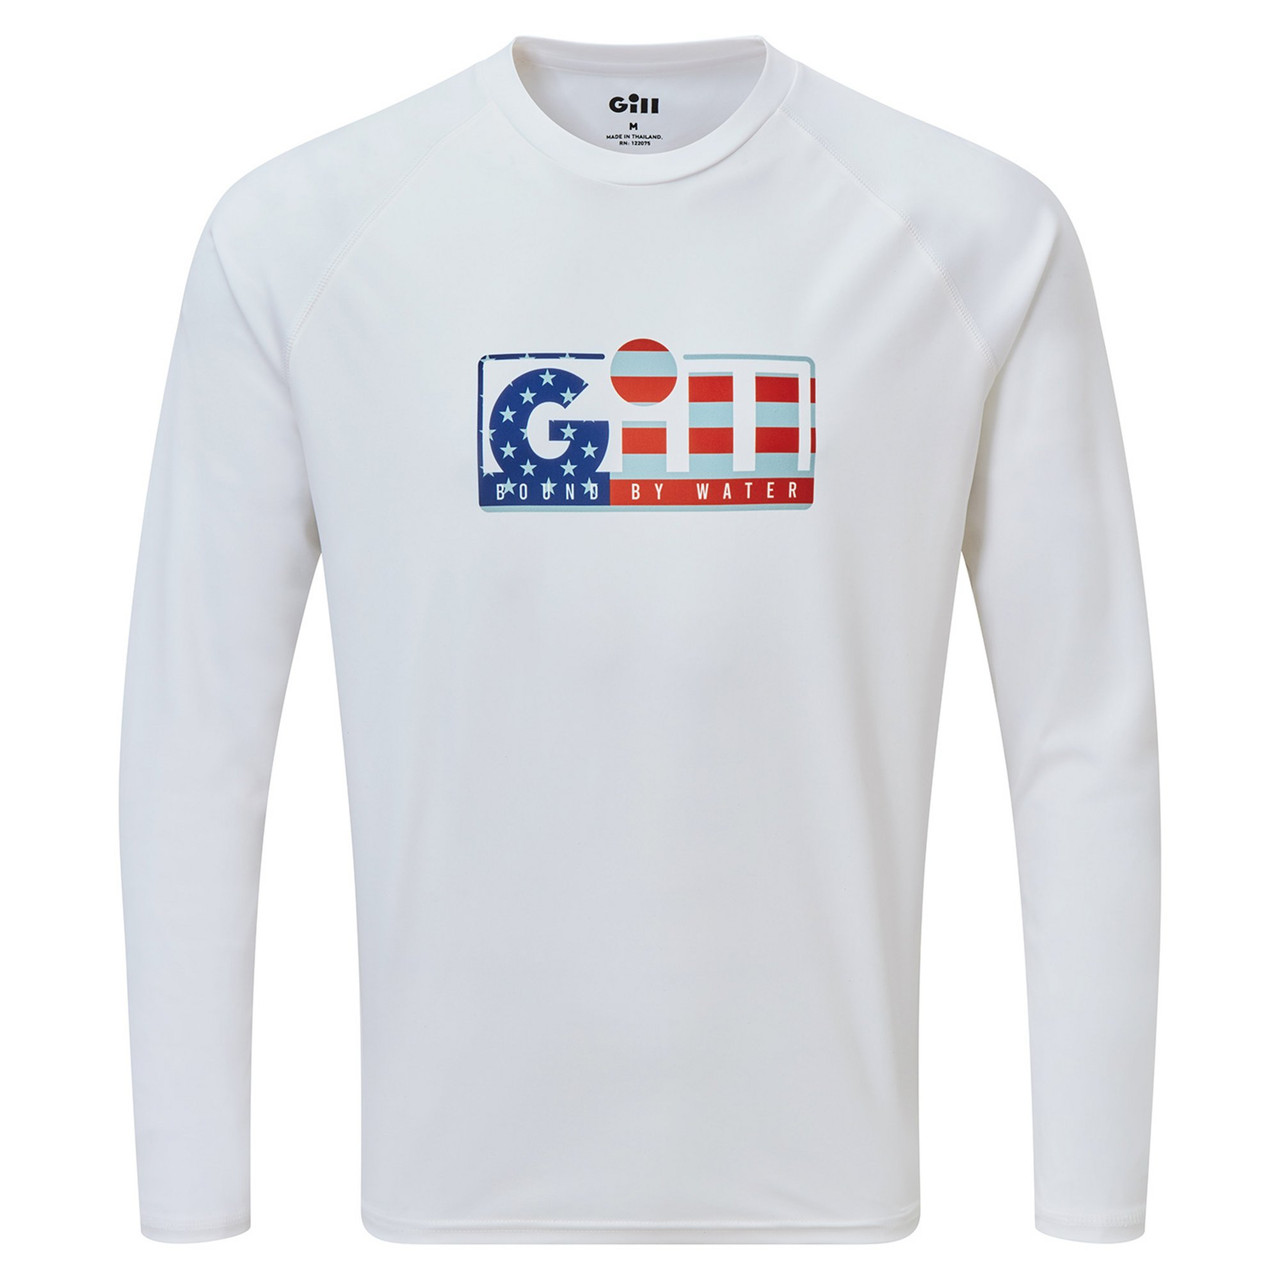 XPEL® Tec Long Sleeve Top in White - Gill Marine Official US Store